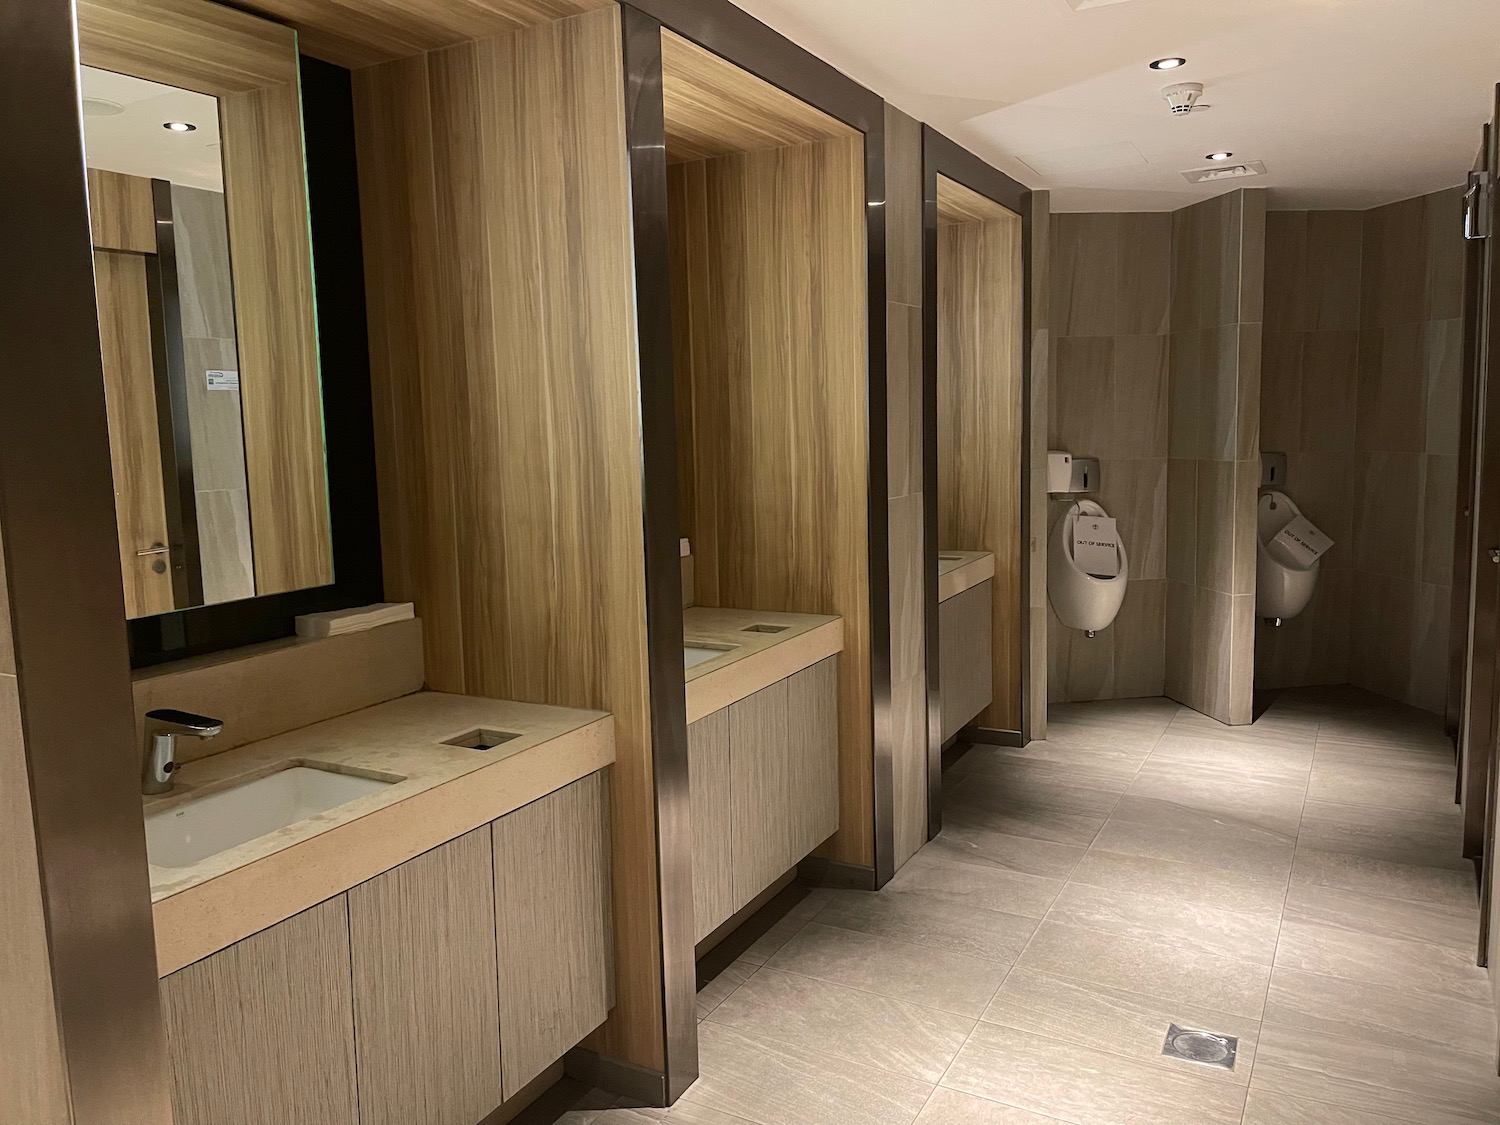 a bathroom with sinks and urinals